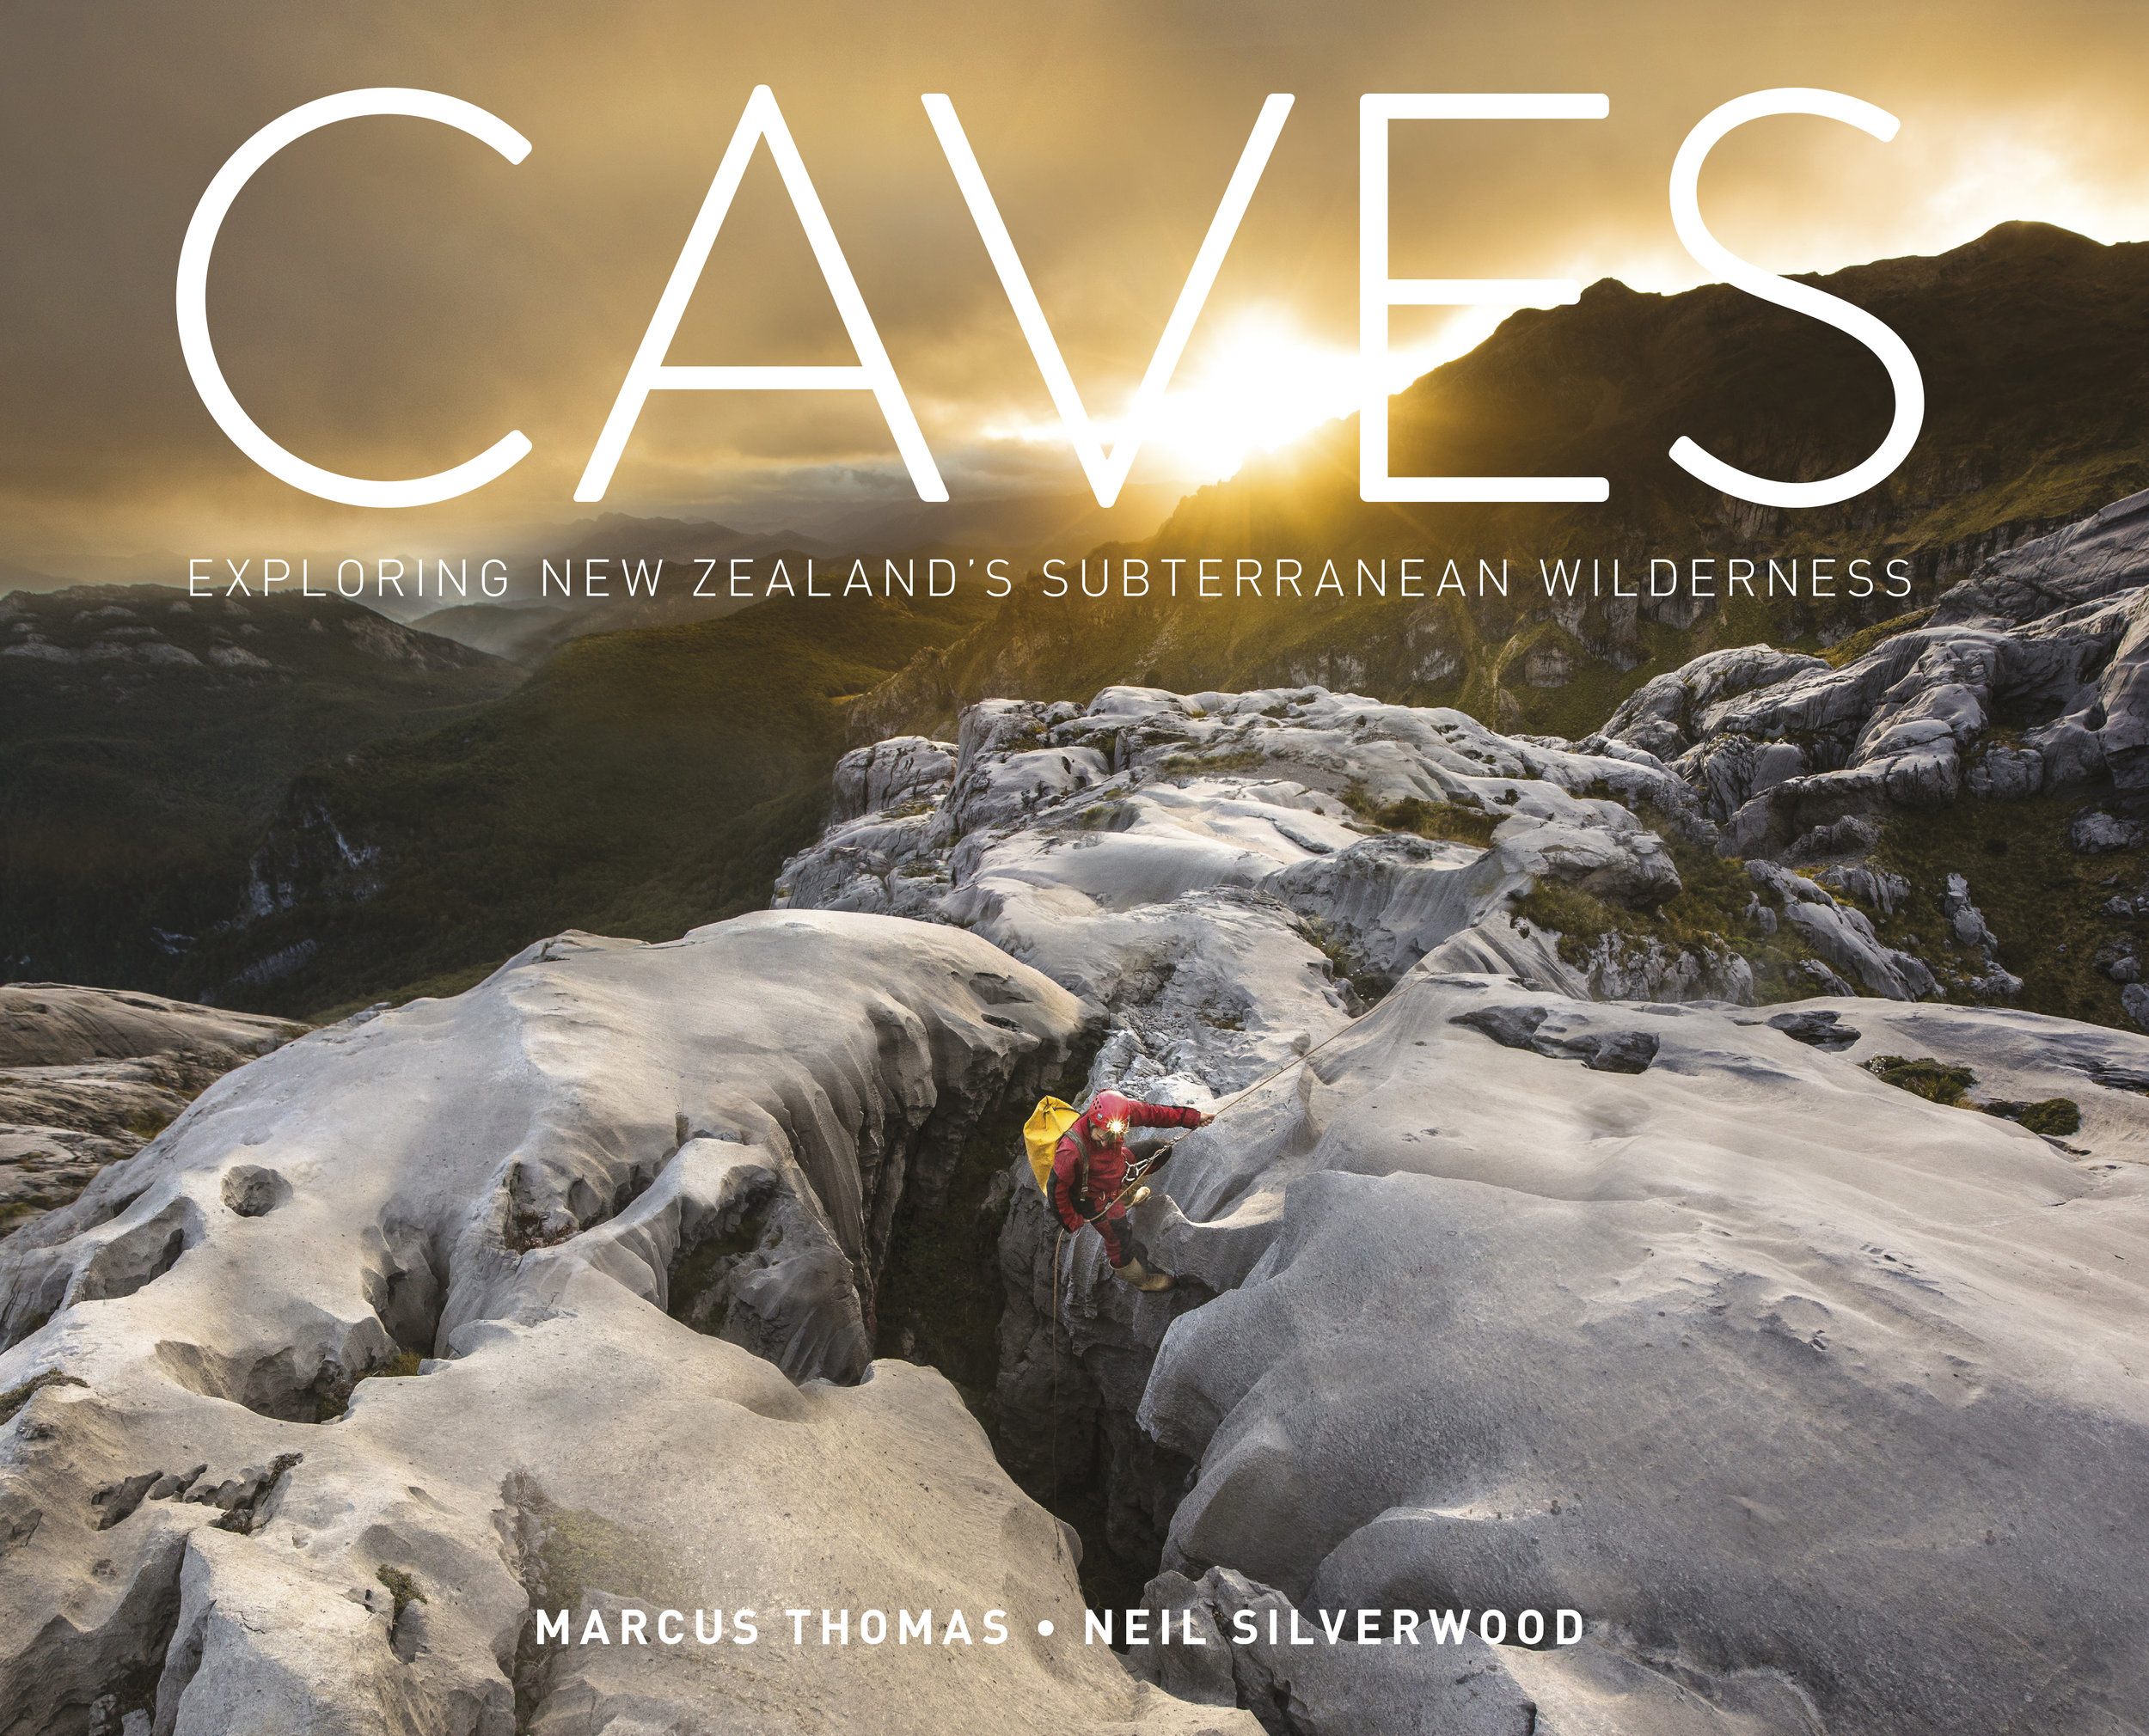 Caves: Exploring New Zealand’s Subterranean Wilderness, Marcus Thomas and Neil Silverwood